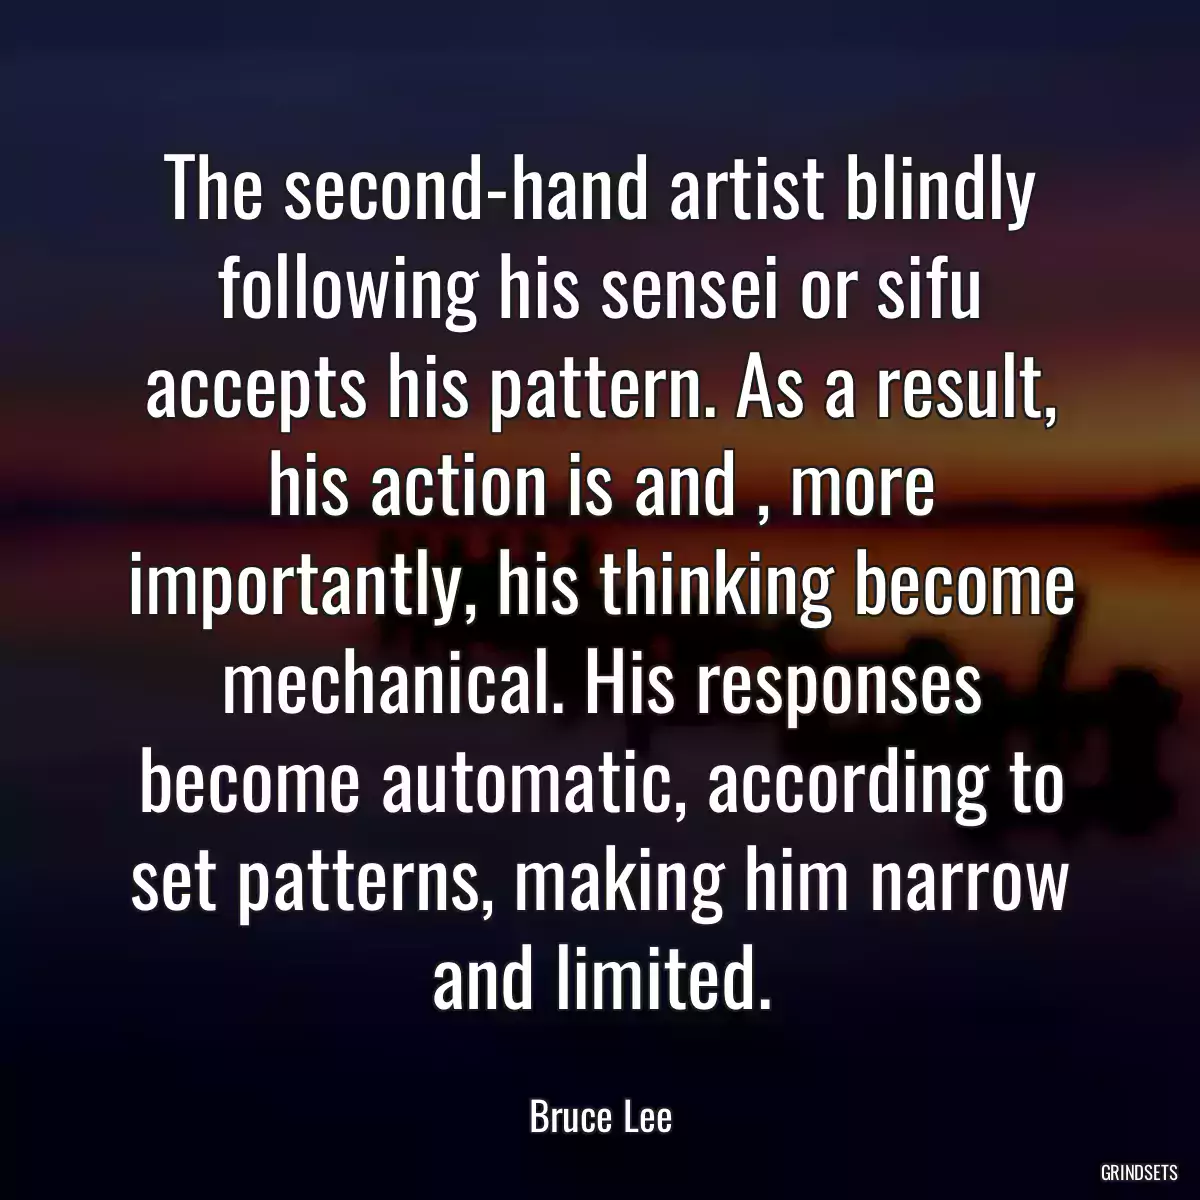 The second-hand artist blindly following his sensei or sifu accepts his pattern. As a result, his action is and , more importantly, his thinking become mechanical. His responses become automatic, according to set patterns, making him narrow and limited.